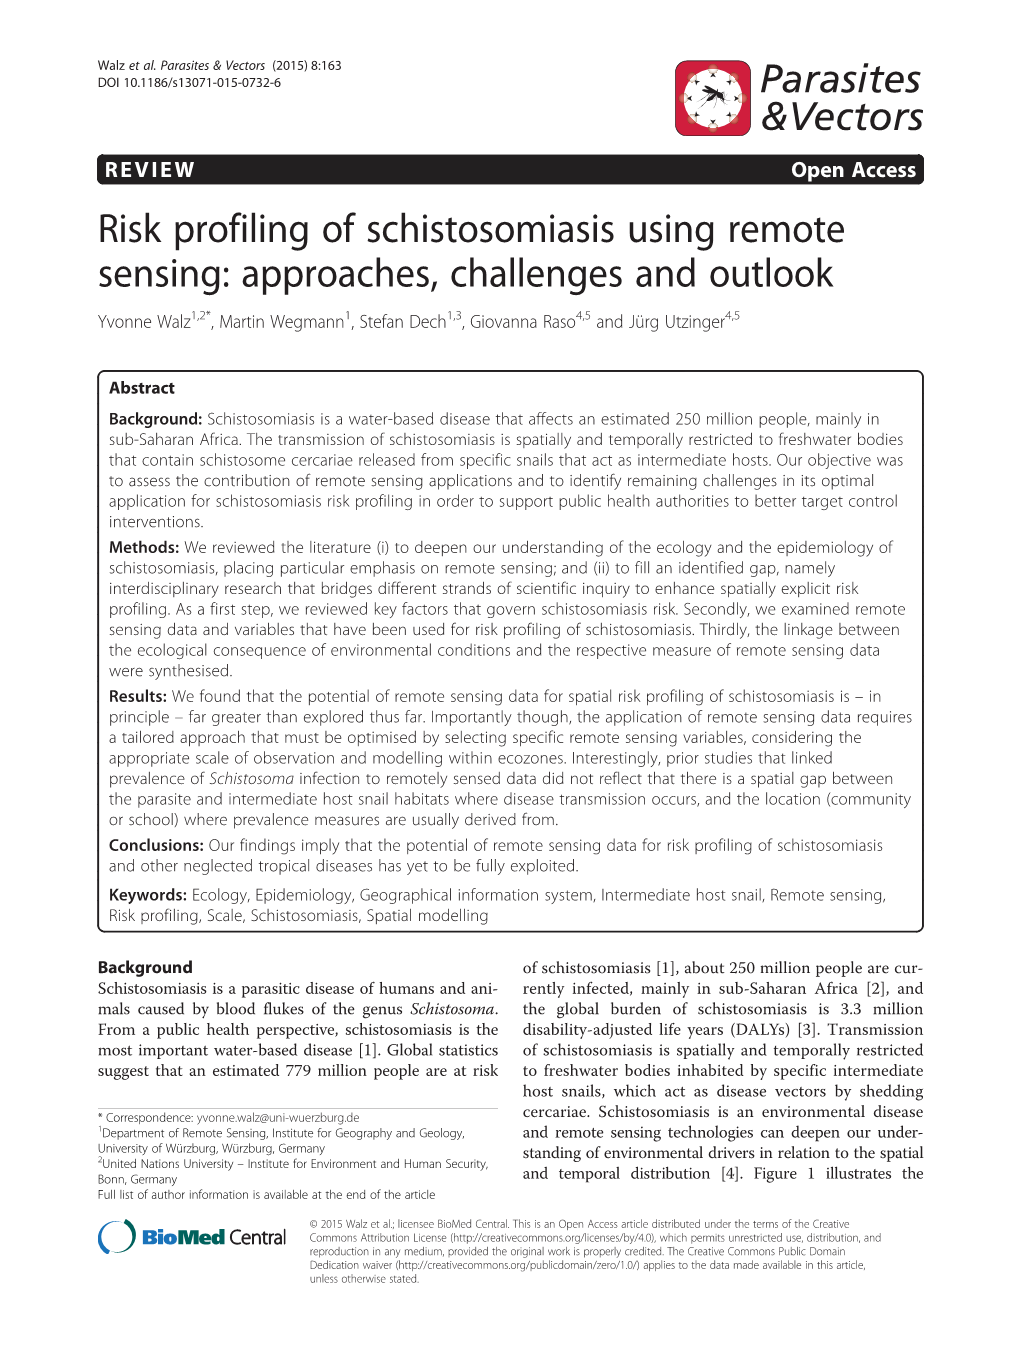 Risk Profiling of Schistosomiasis Using Remote Sensing: Approaches, Challenges and Outlook